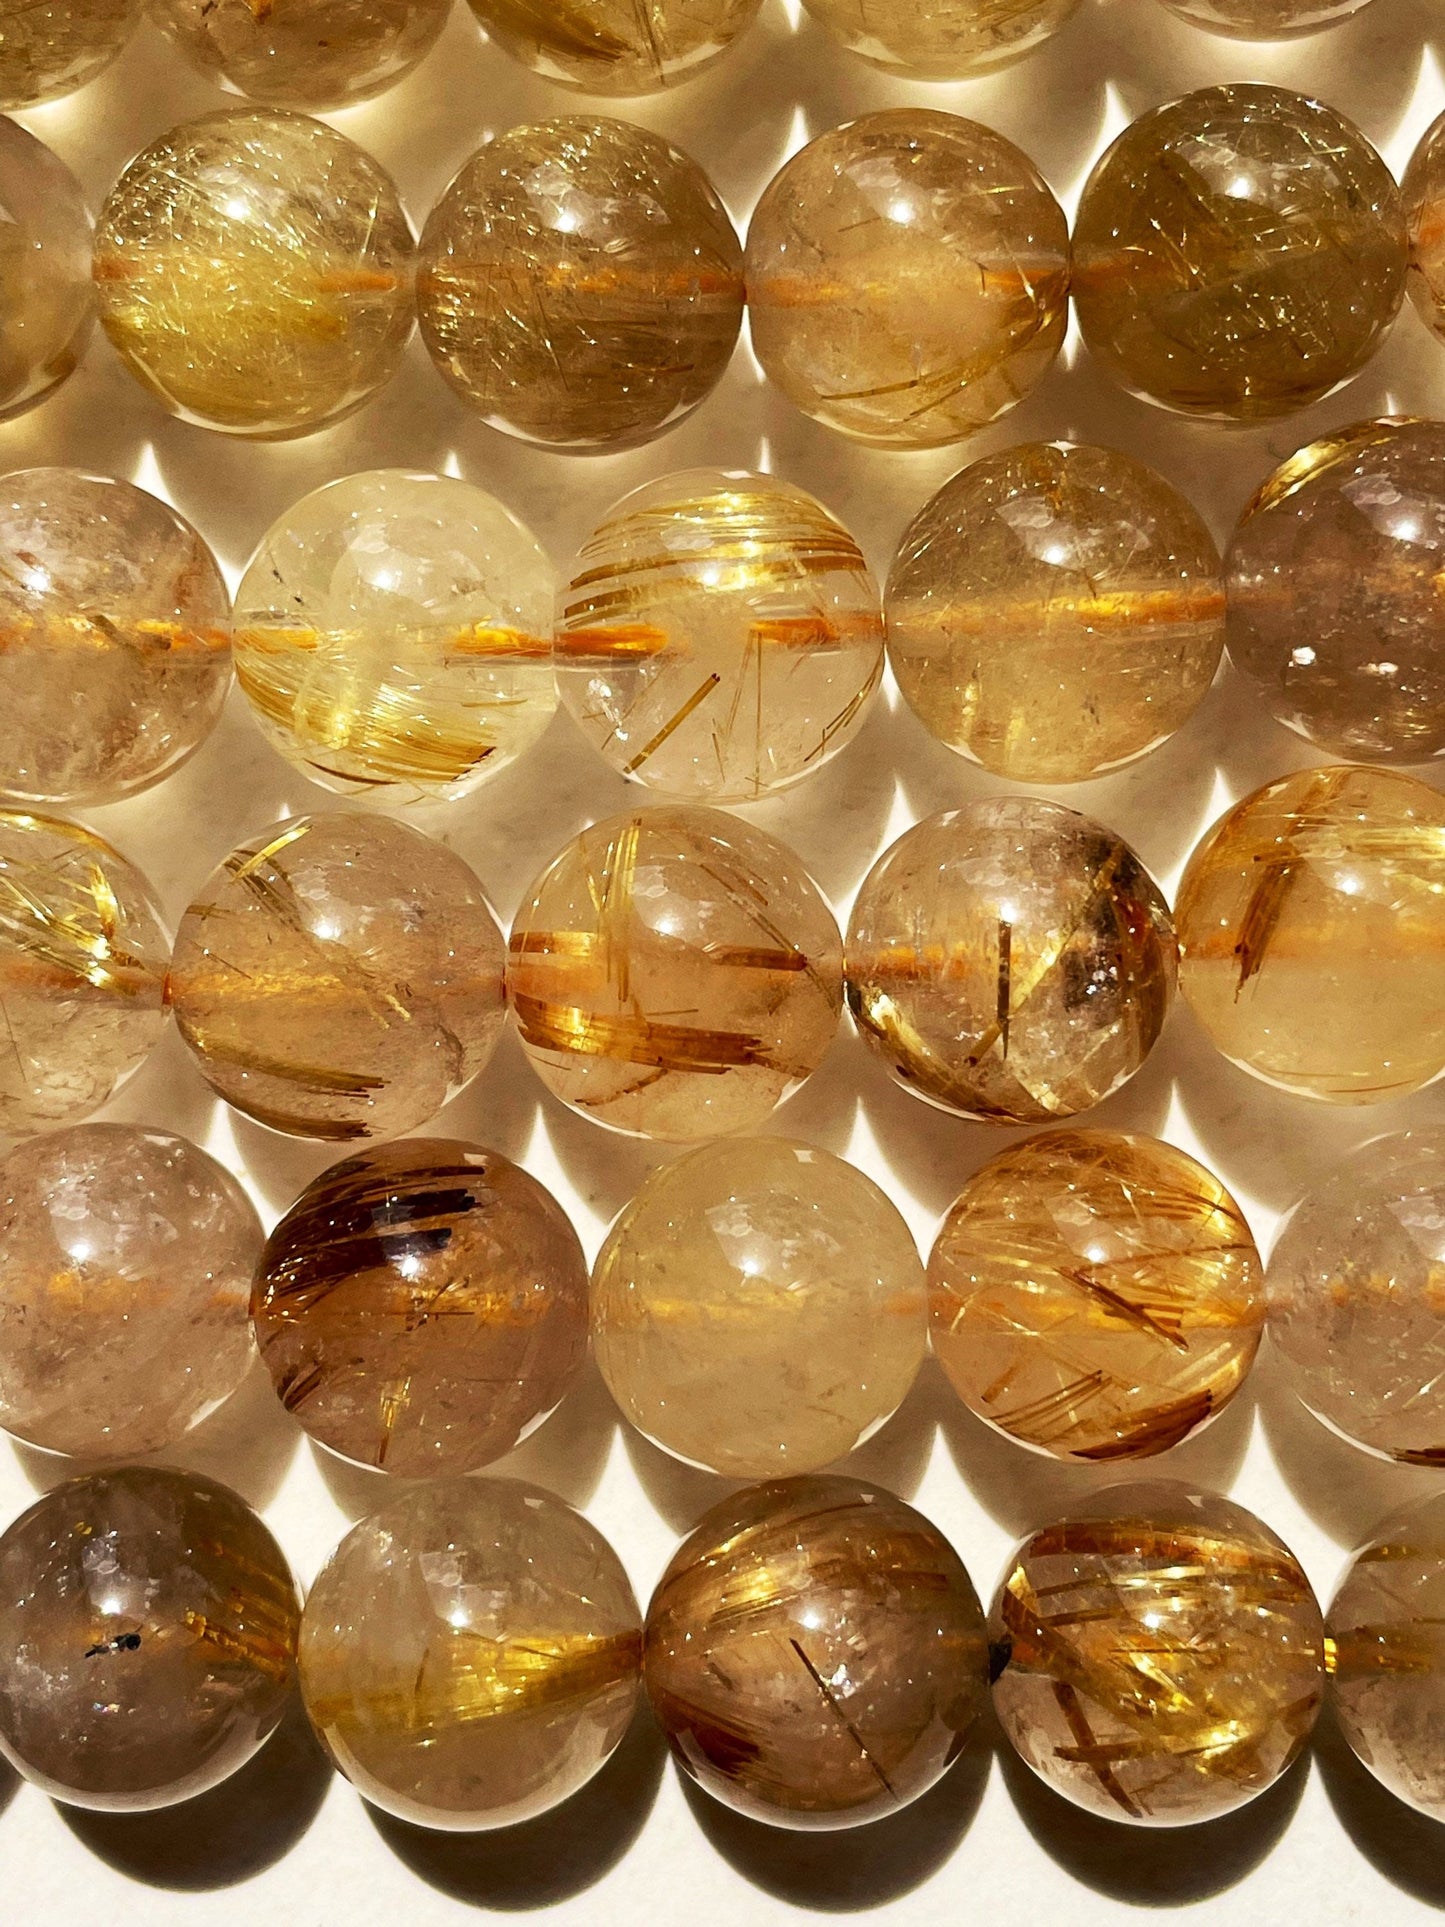 AAA Excellent Quality Gold Rutilated Quartz Gemstone Bead 4mm 6mm 8mm 10mm Round Bead, Beautiful Quartz with Gold Rutilated Hairs